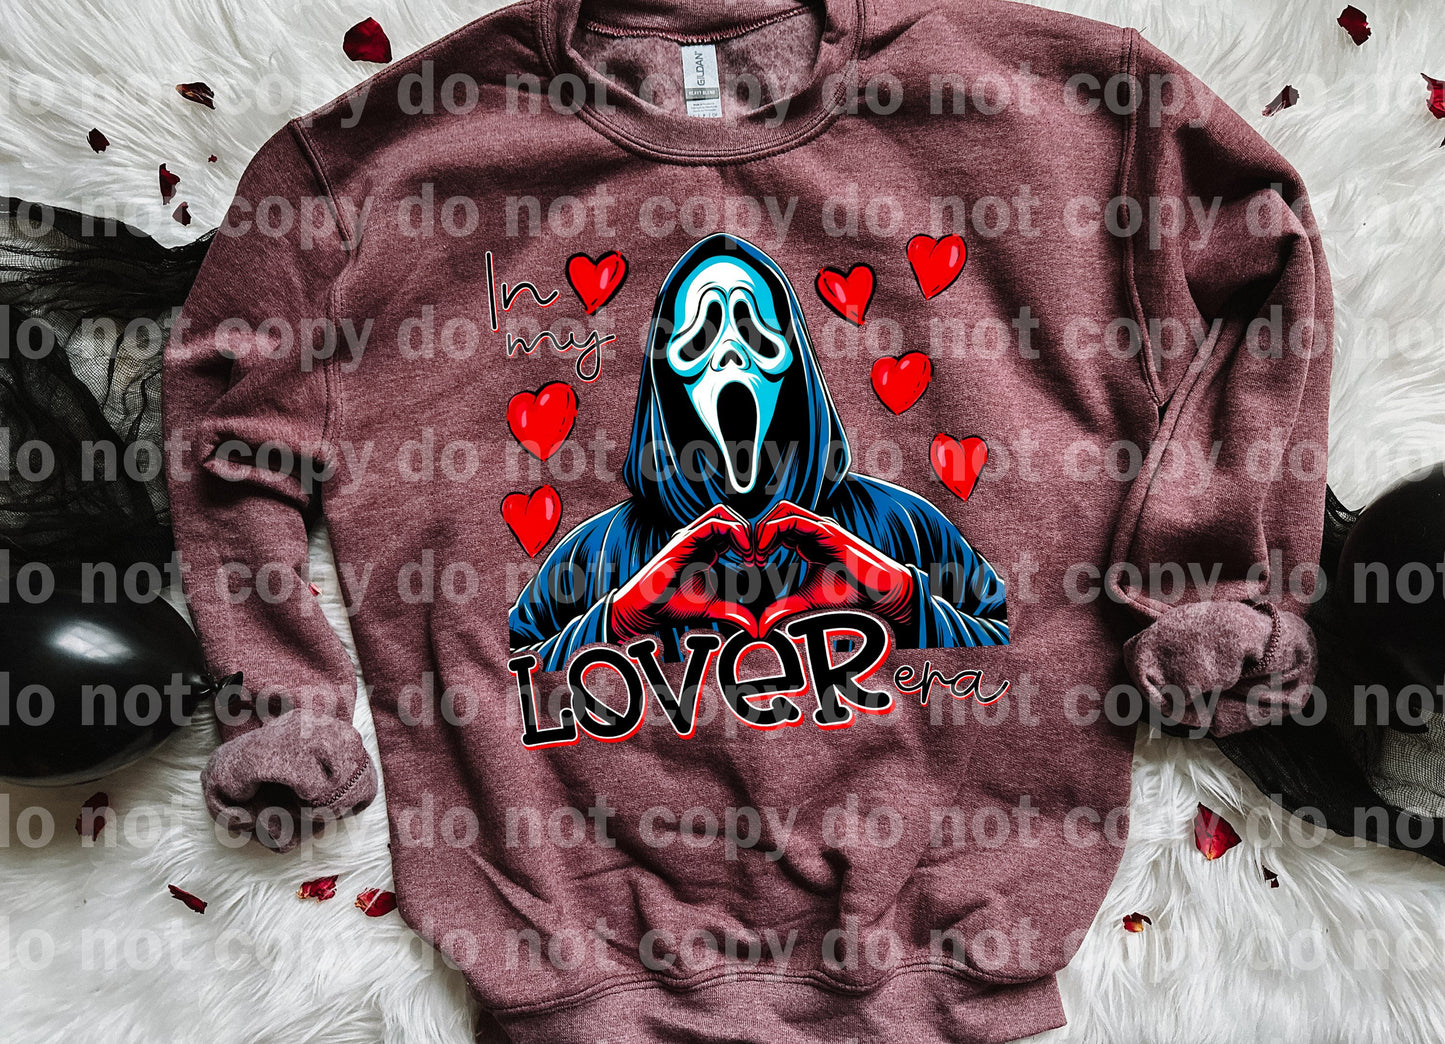 In My Lover Era Ghost Face Dream Print or Sublimation Print